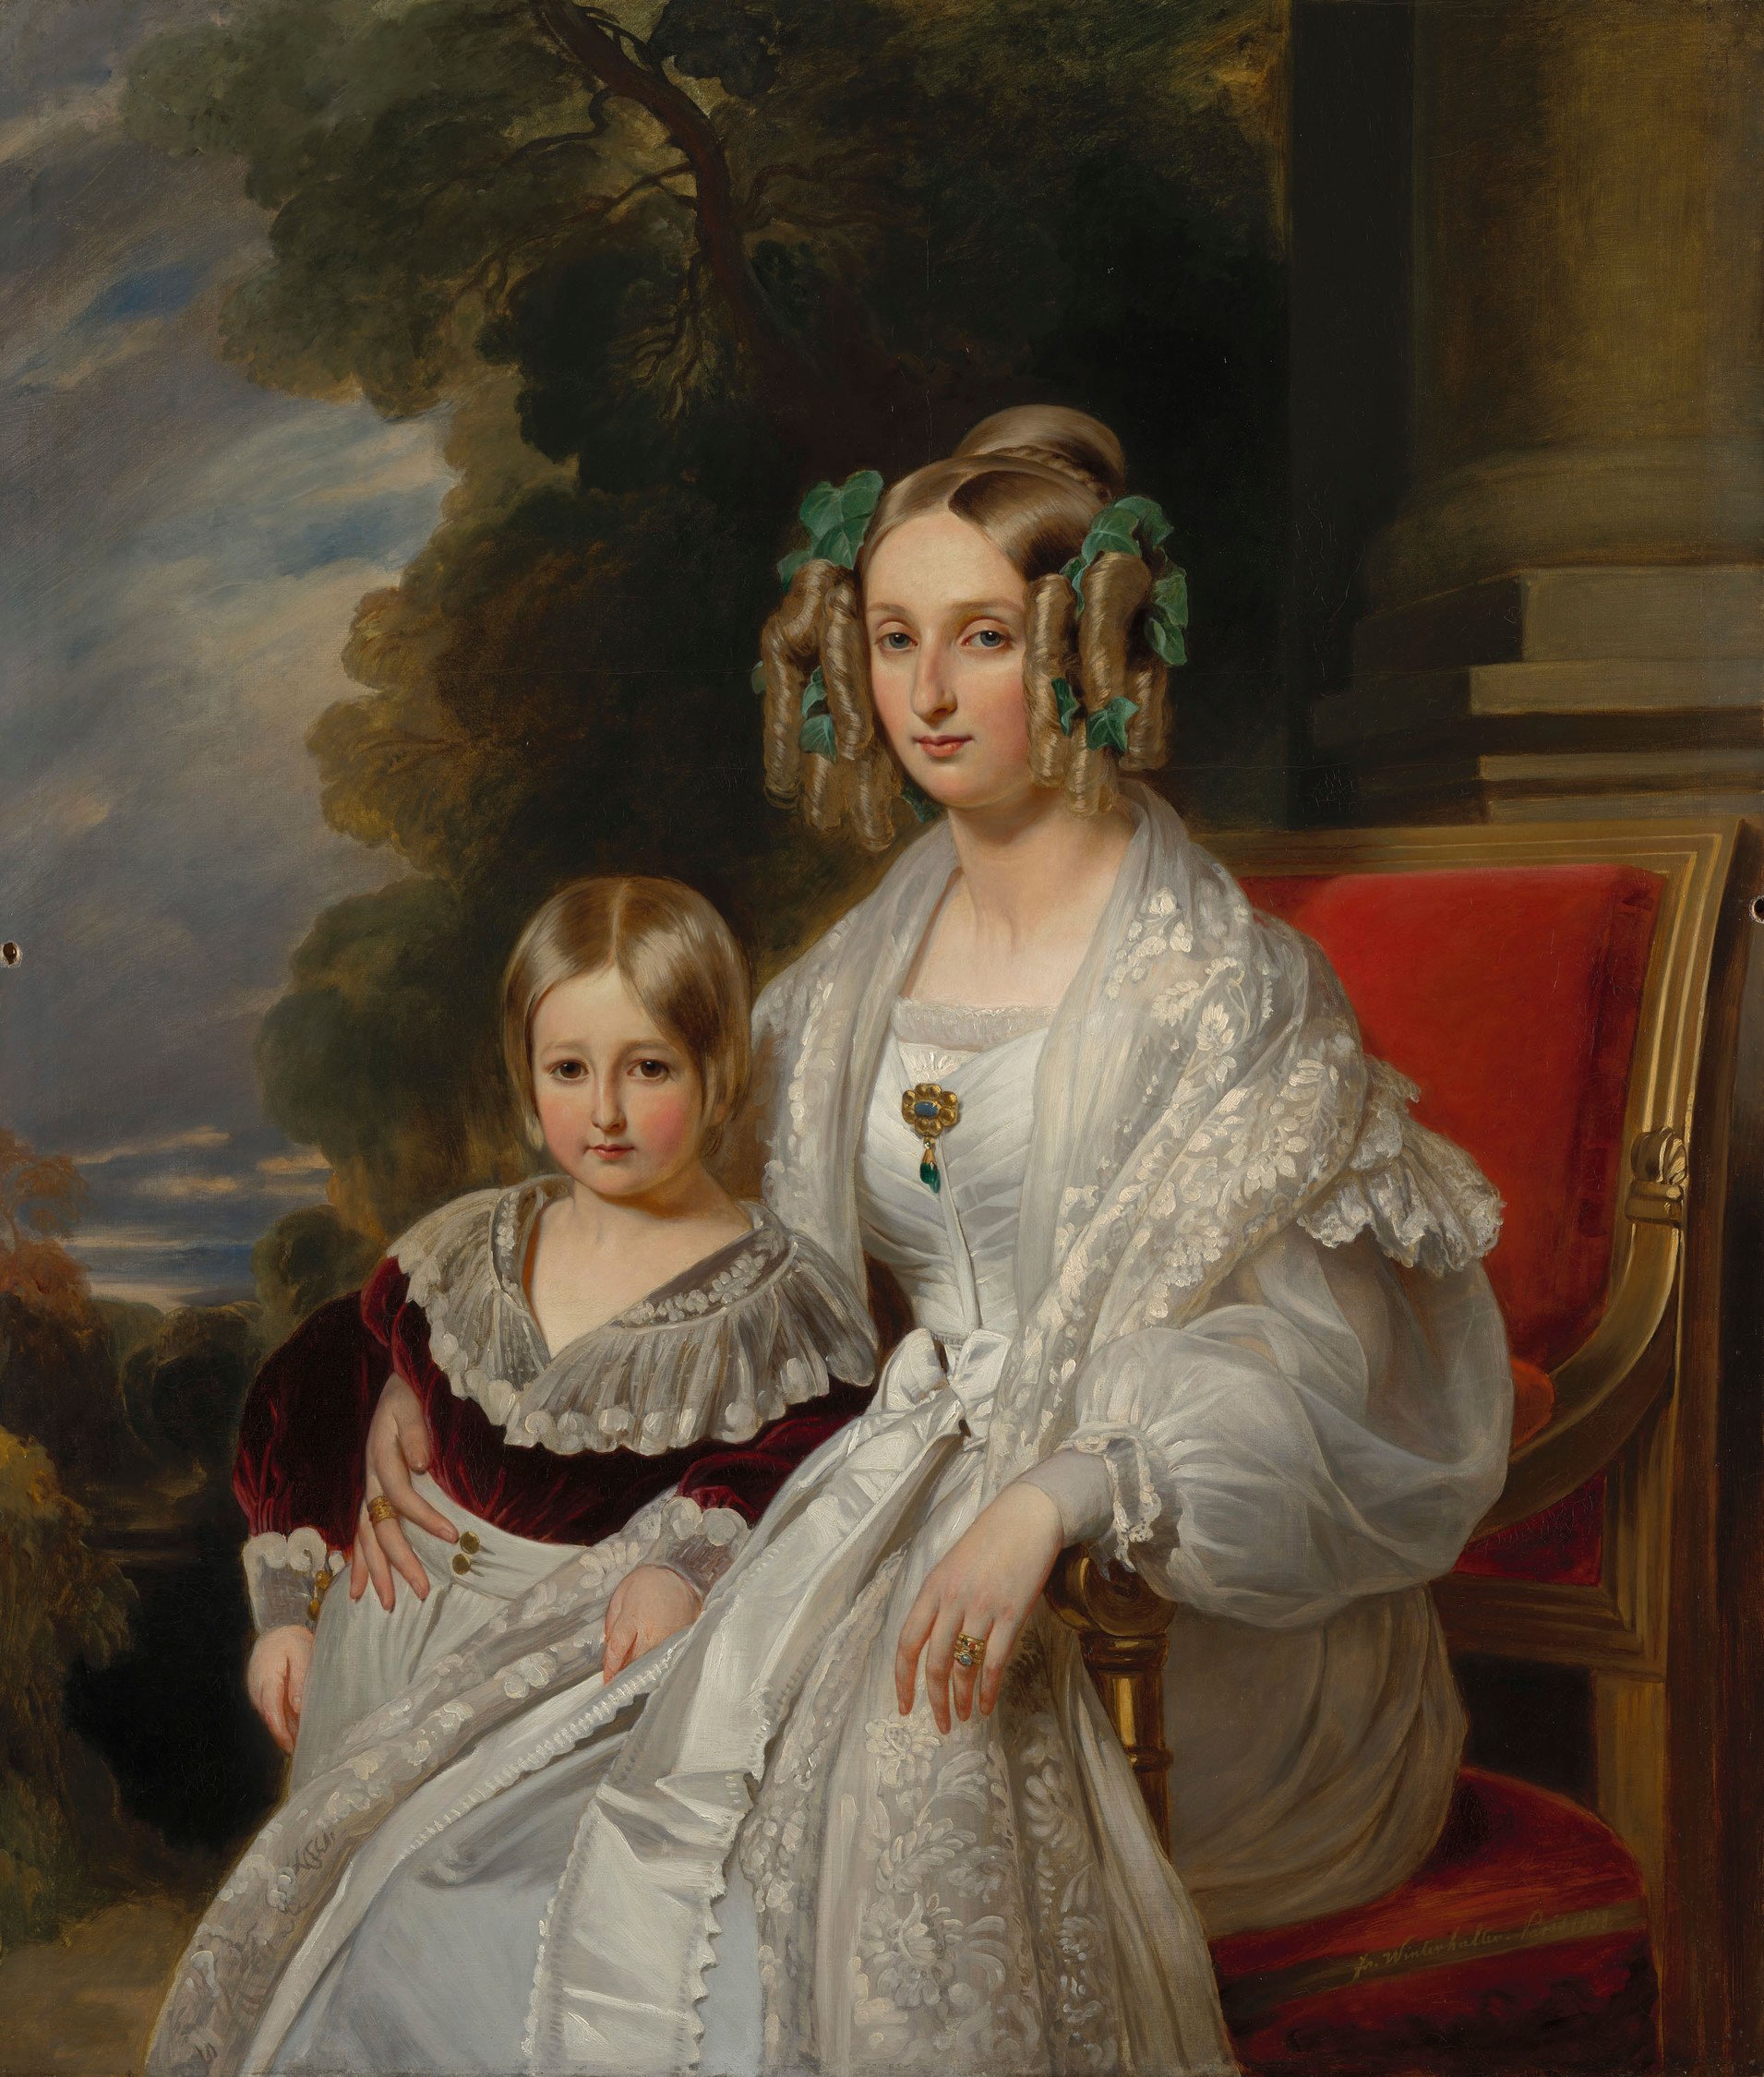 Winterhalter was born in the Black Forest where he was encouraged to draw at school. In 1818 he went to Freiburg to study under Karl Ludwig Sch&uuml;ler and then moved to Munich in 1823, where he attended the Academy and studied under Josef Stieler, a fas